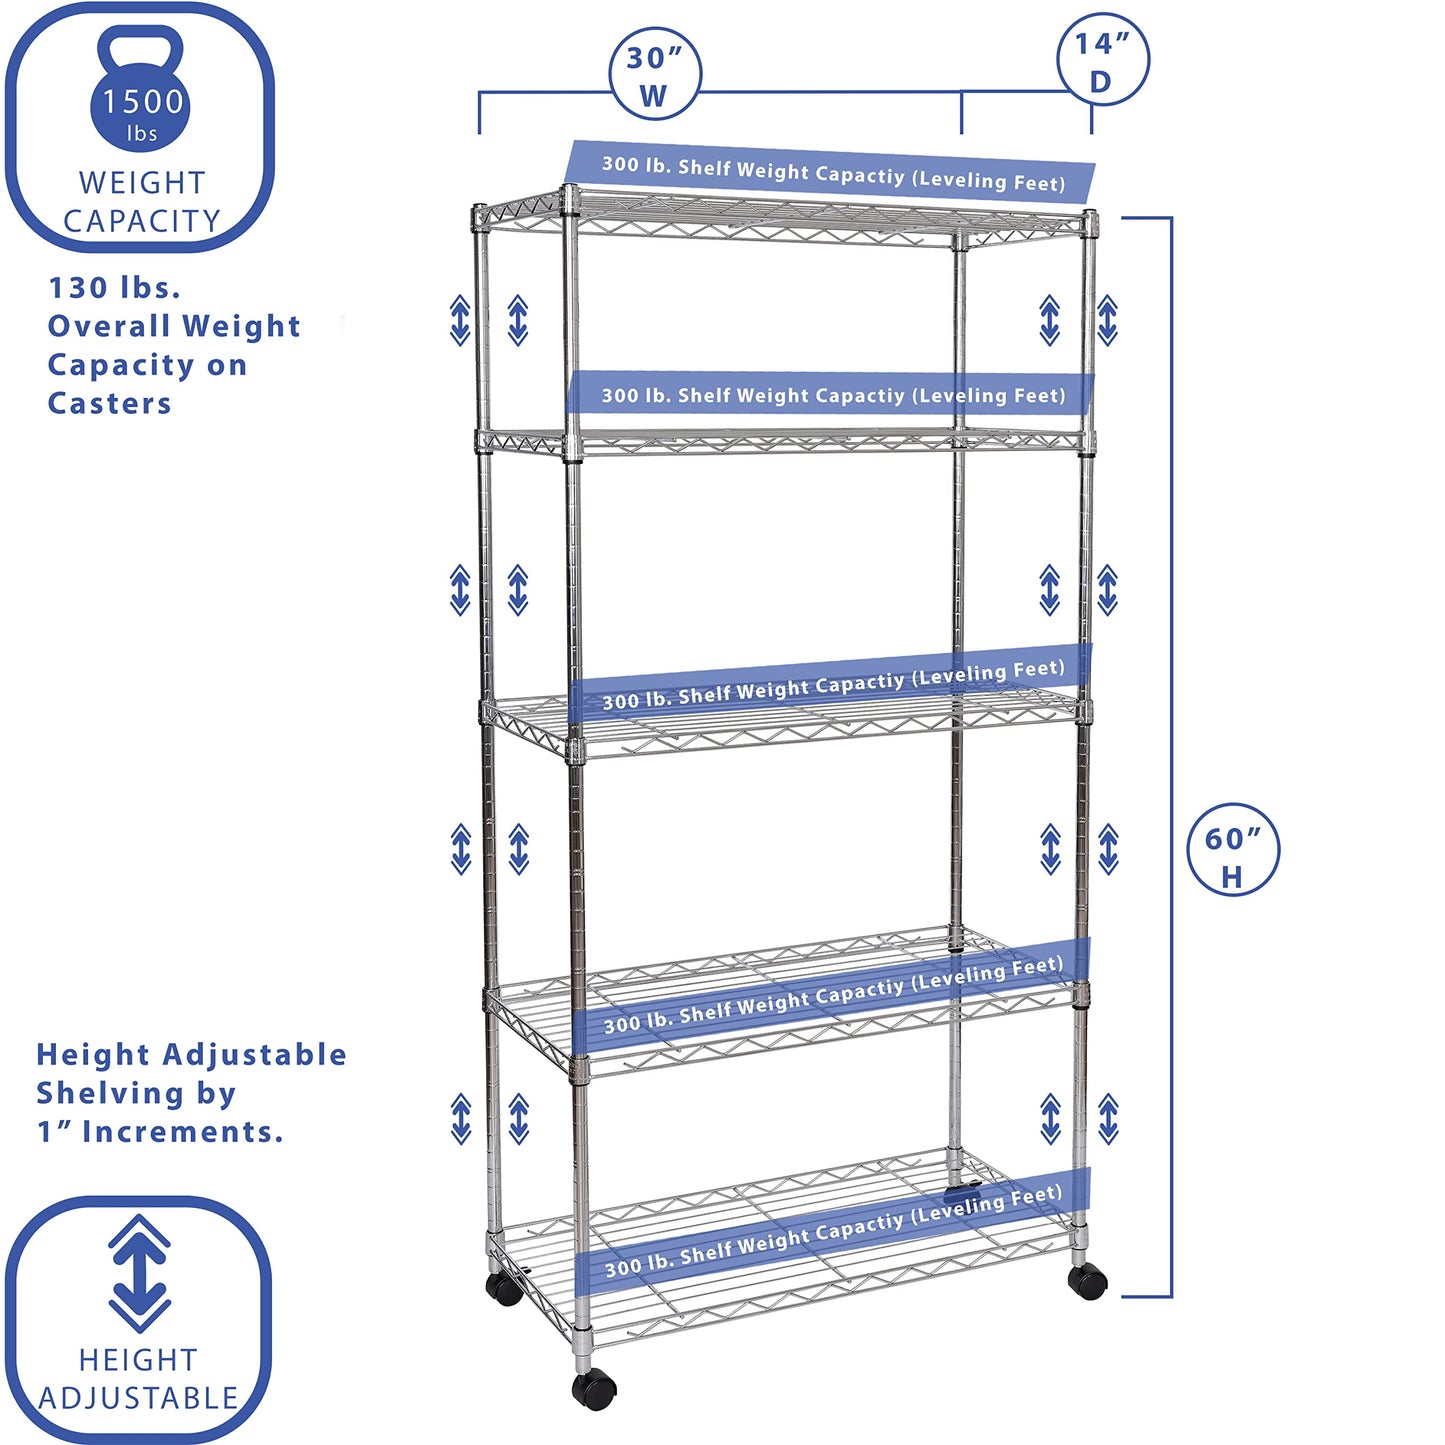 Seville Classics 5-Tier Wire Shelving with Wheels, 5-Tier, 30"" W x 14"" D (NEW MODEL), Chrome Plating, Plated Steel